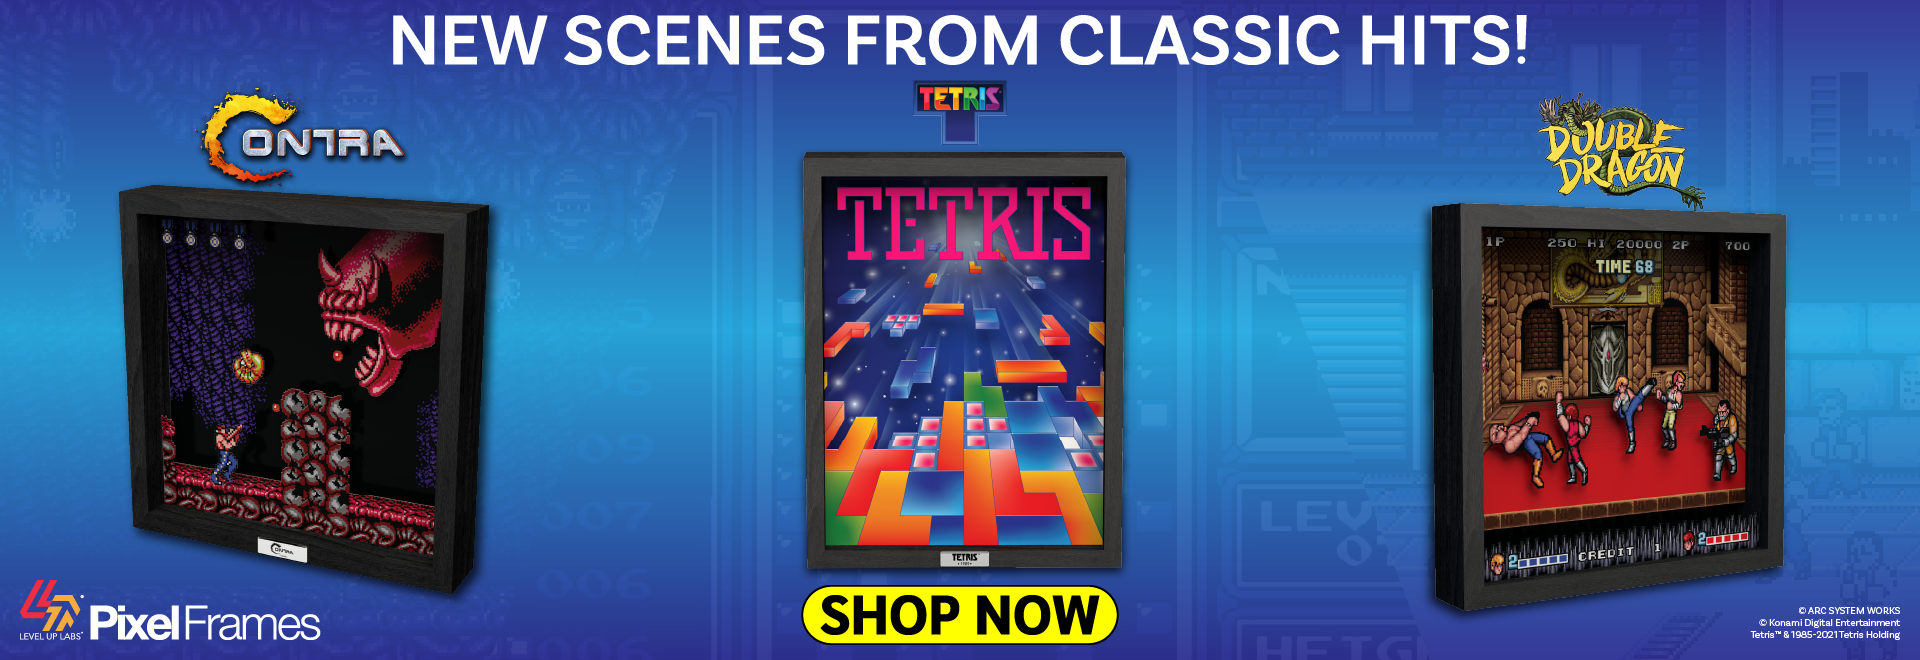 New Scenes of Pixel Frames Now Available!